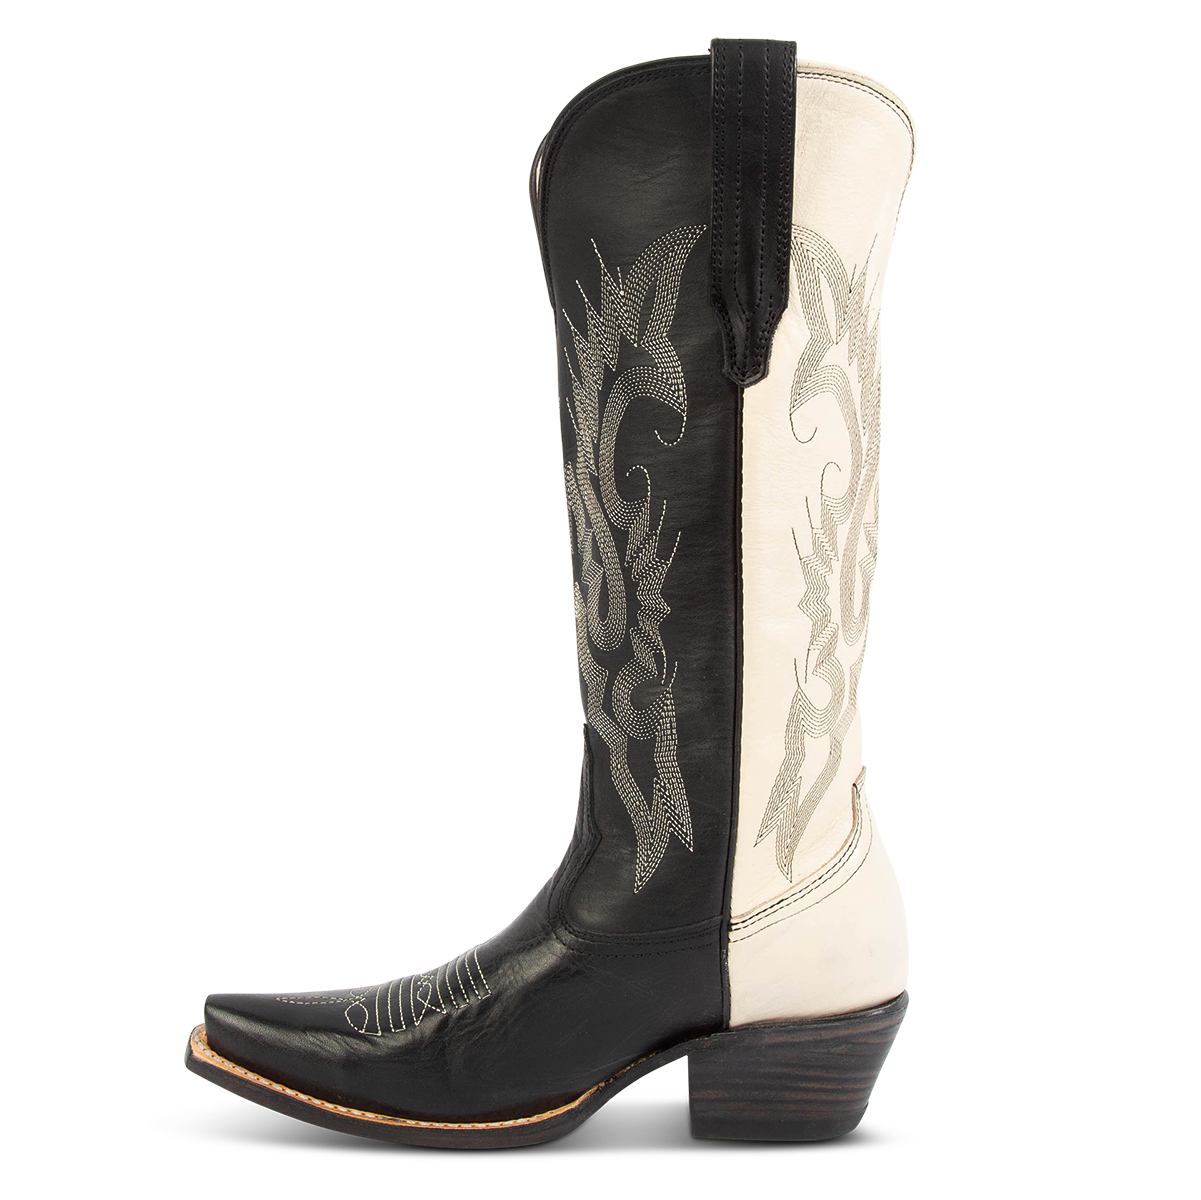 Side view showing leather pull straps and western stitch detailing on FREEBIRD women's Woodland black multi boot